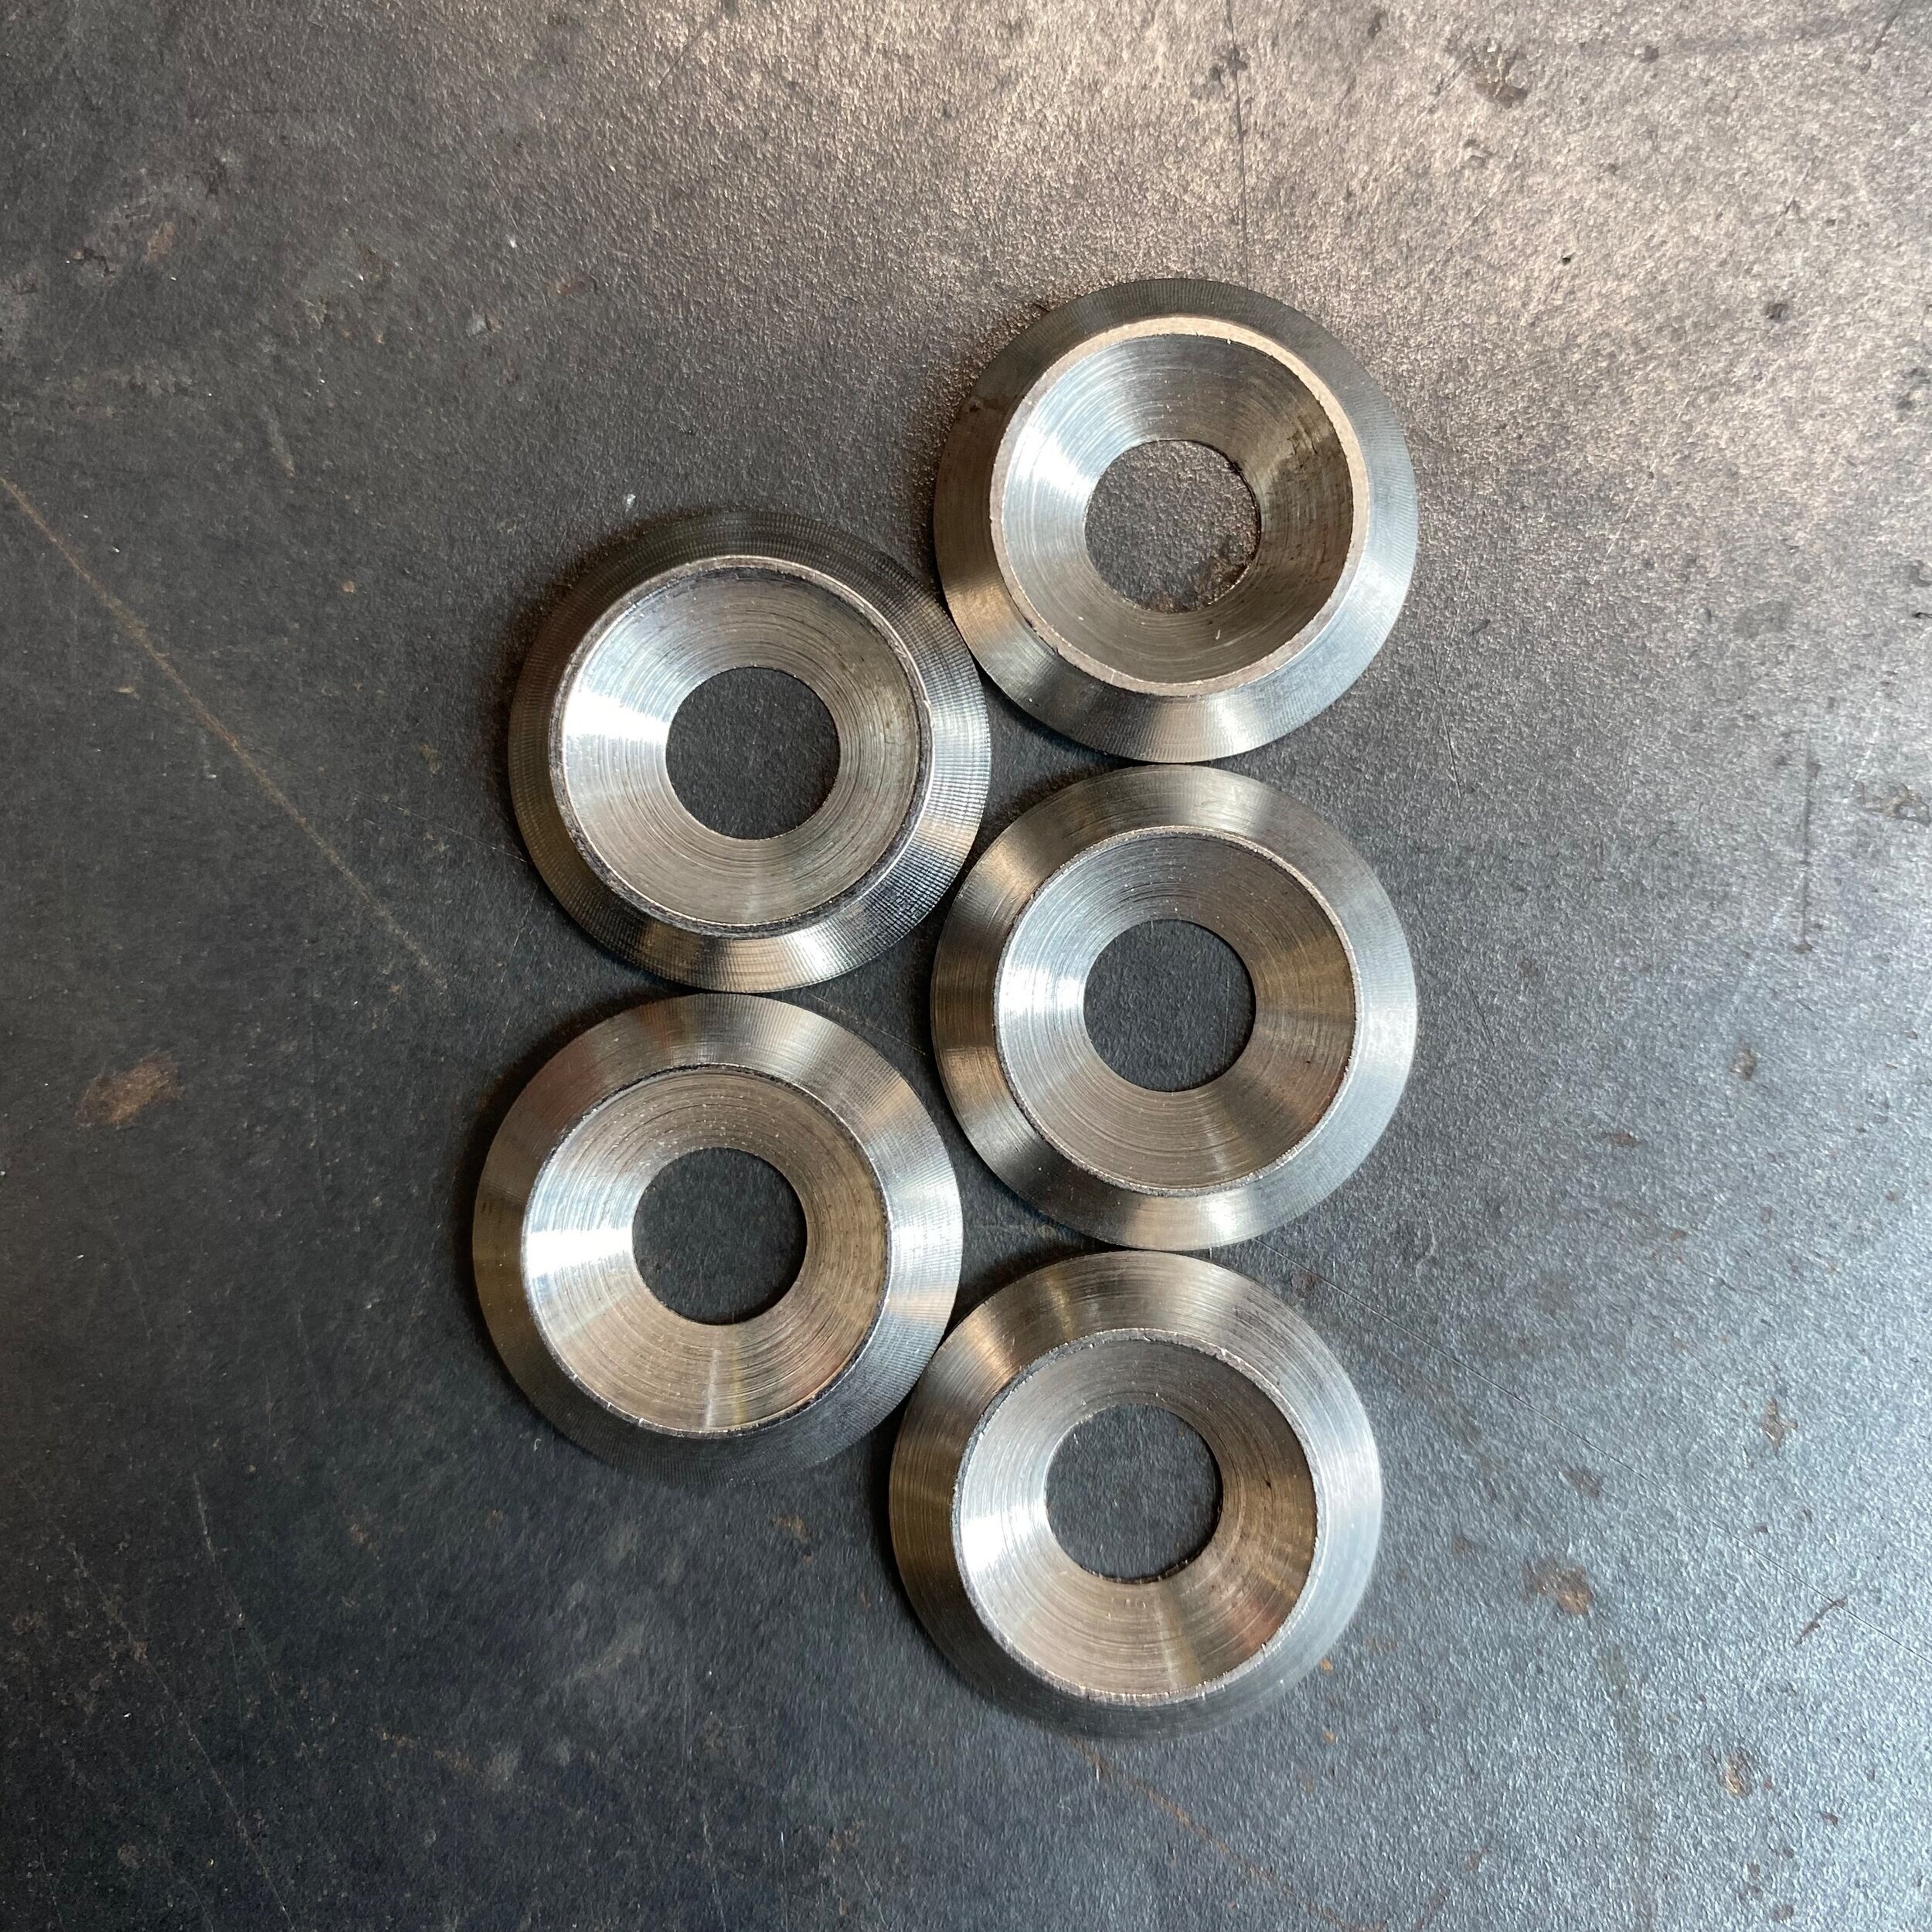 500 Qty #6 Stainless Steel Countersunk Finish Washers304 SS Finishing Cup BC 